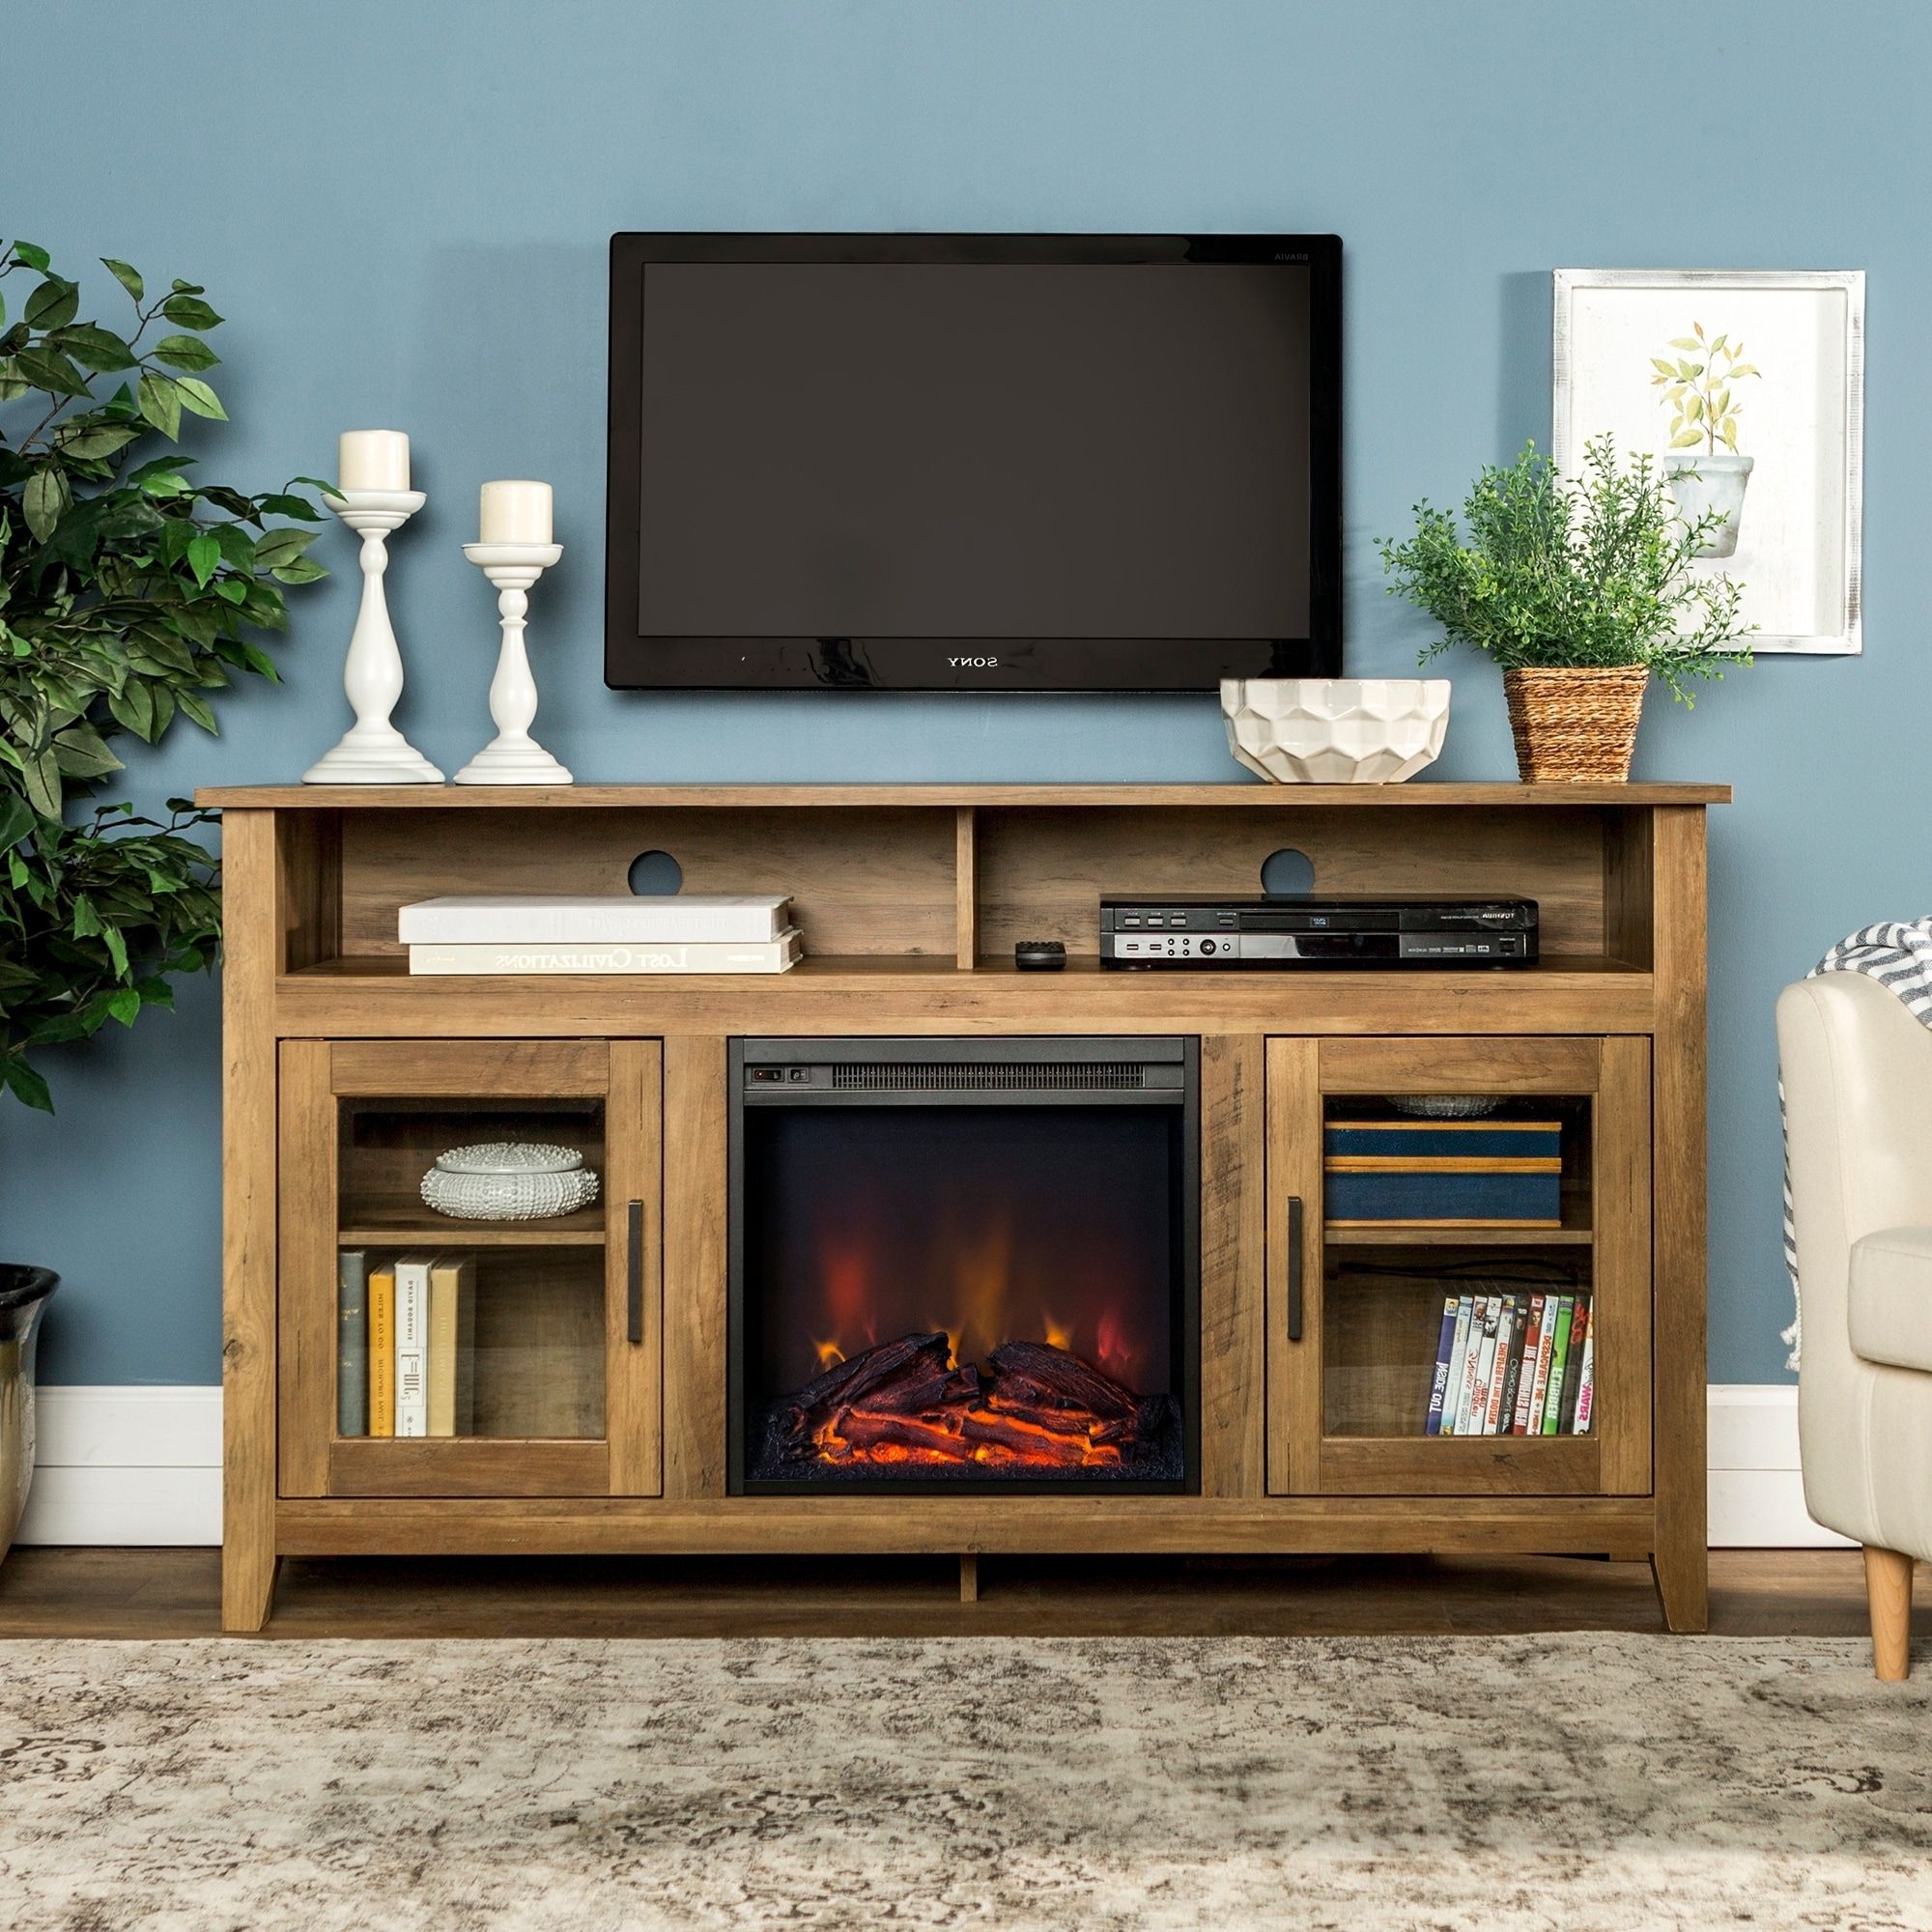 Fireplace Tv Stand Oak | Omeublog Secreto Intended For Modern Farmhouse Fireplace Credenza Tv Stands Rustic Gray Finish (Gallery 2 of 20)